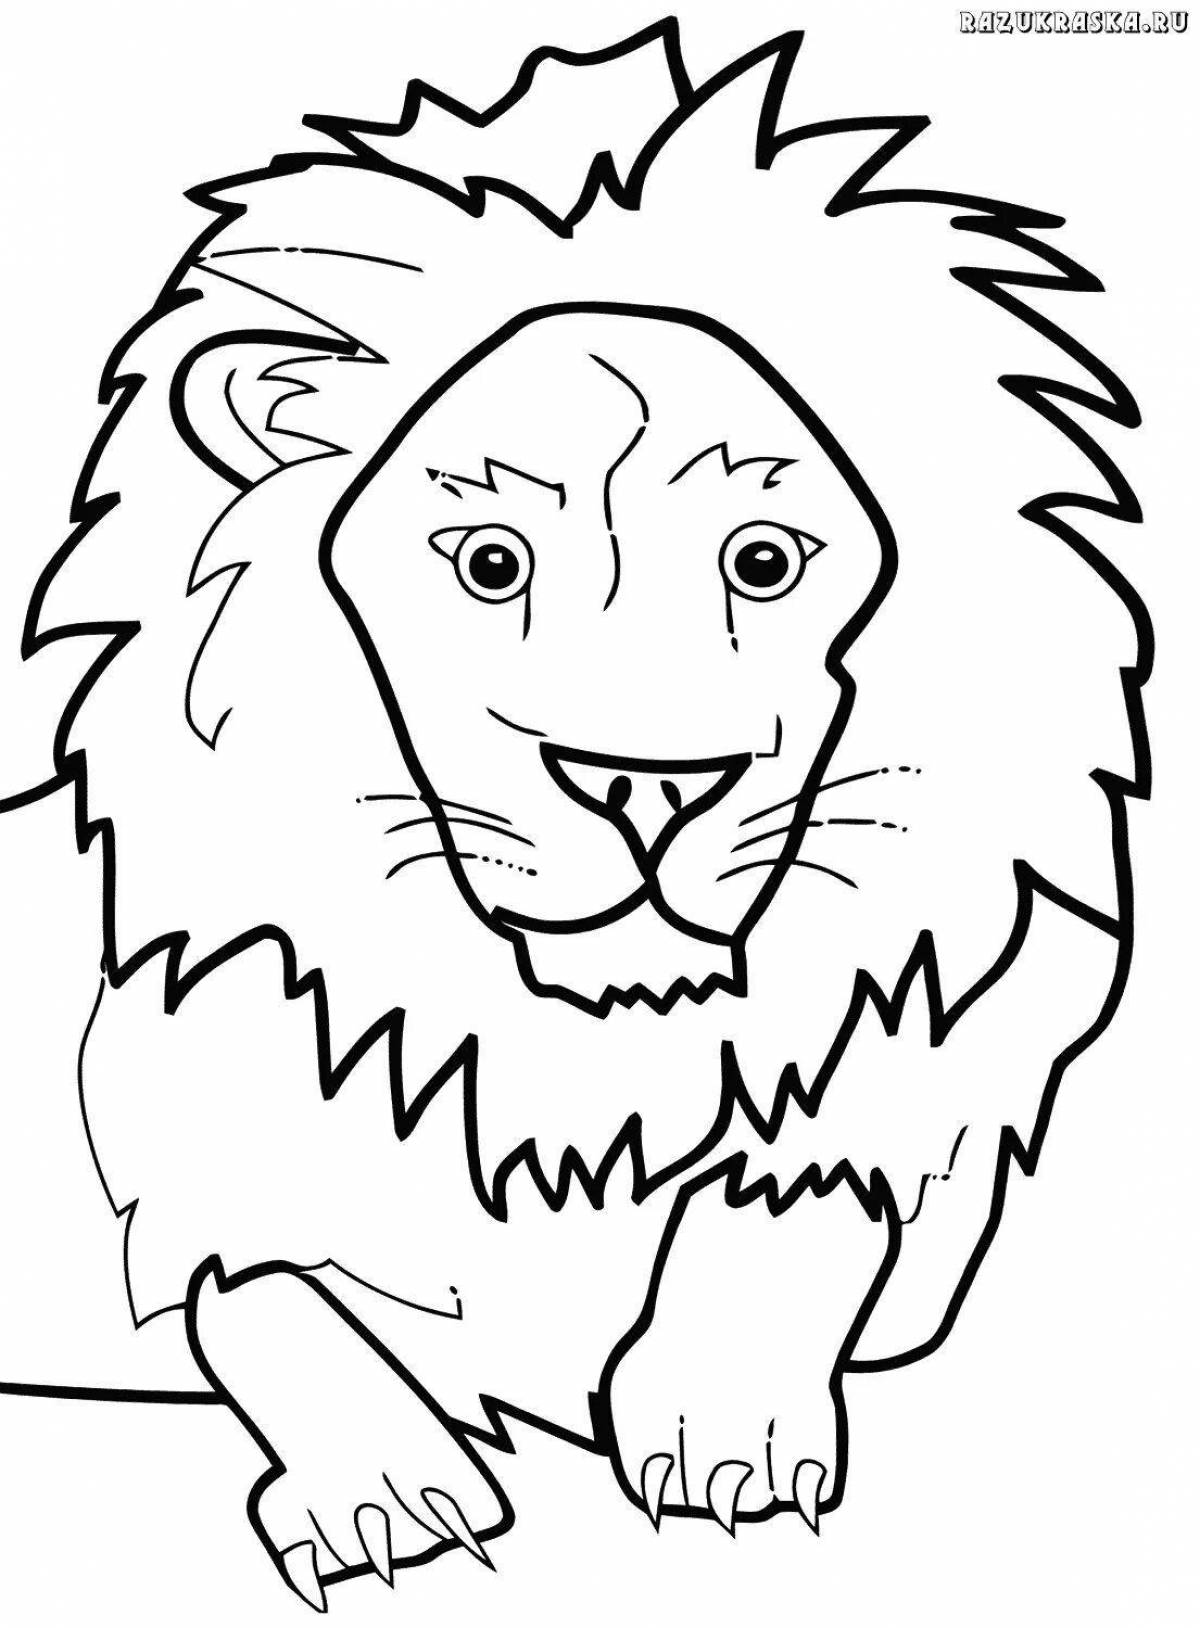 Coloring majestic lion for children 6-7 years old